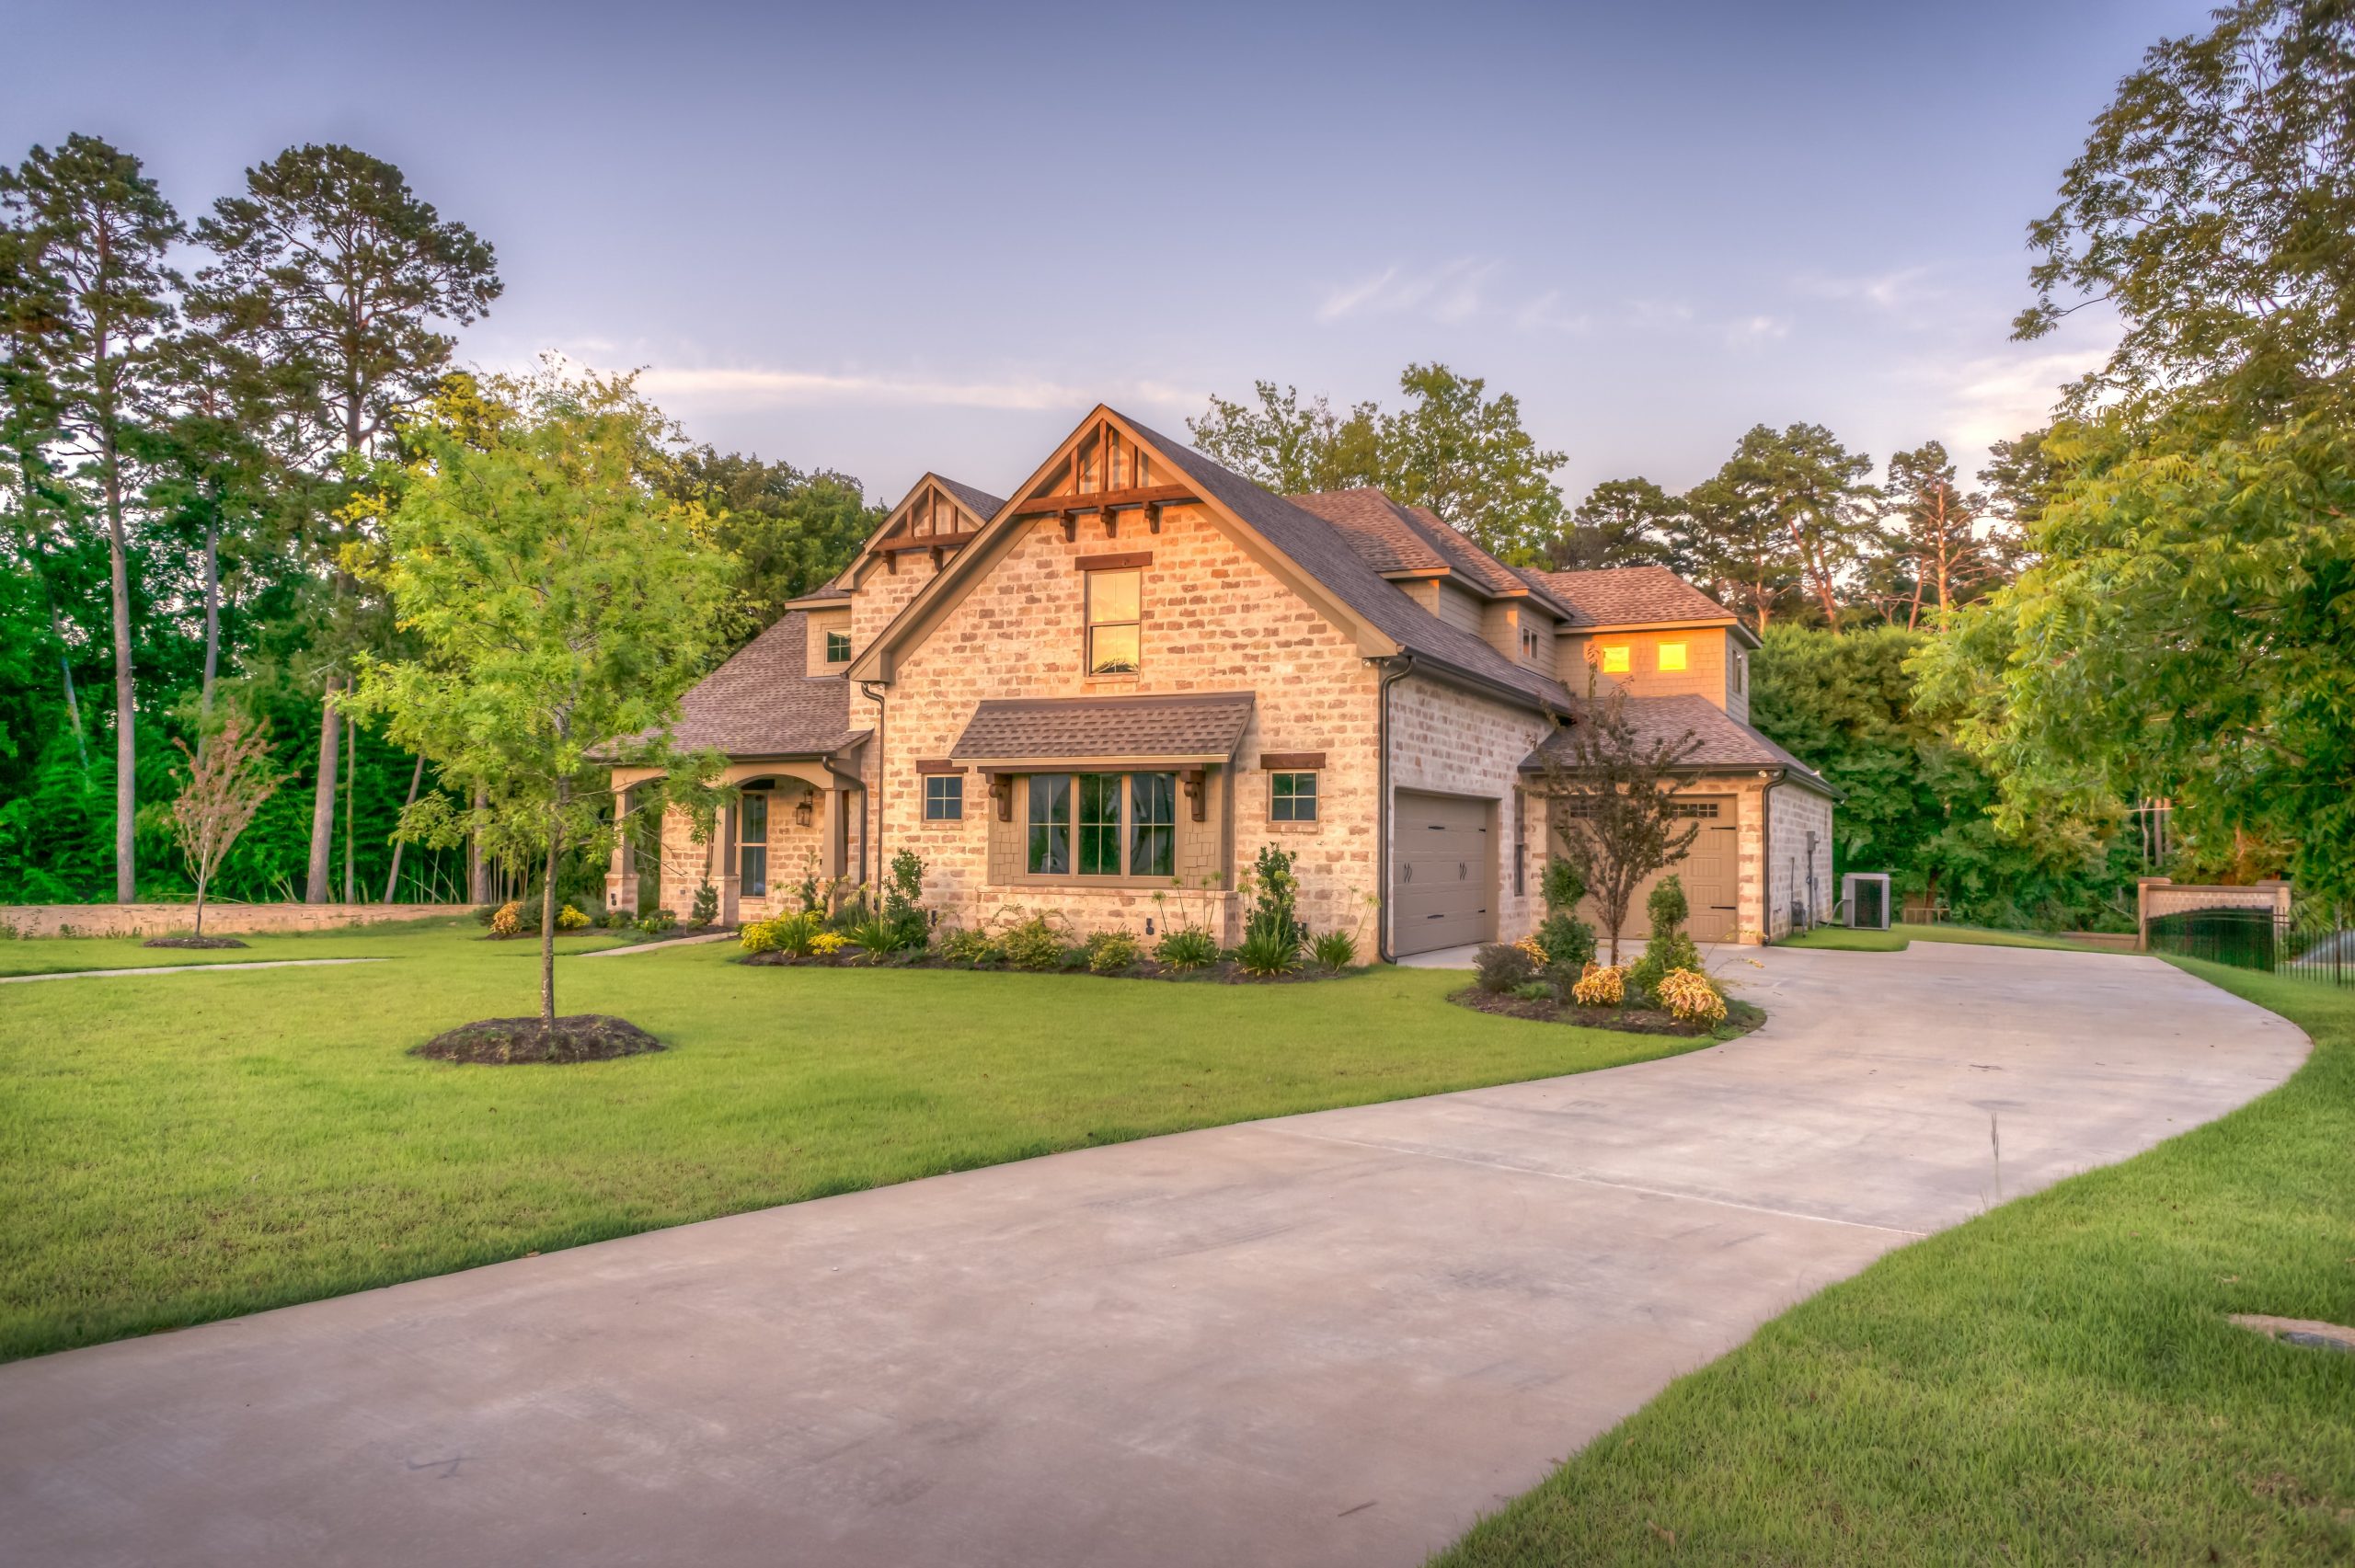 How to Upgrade Your Home’s Exterior Landscaping